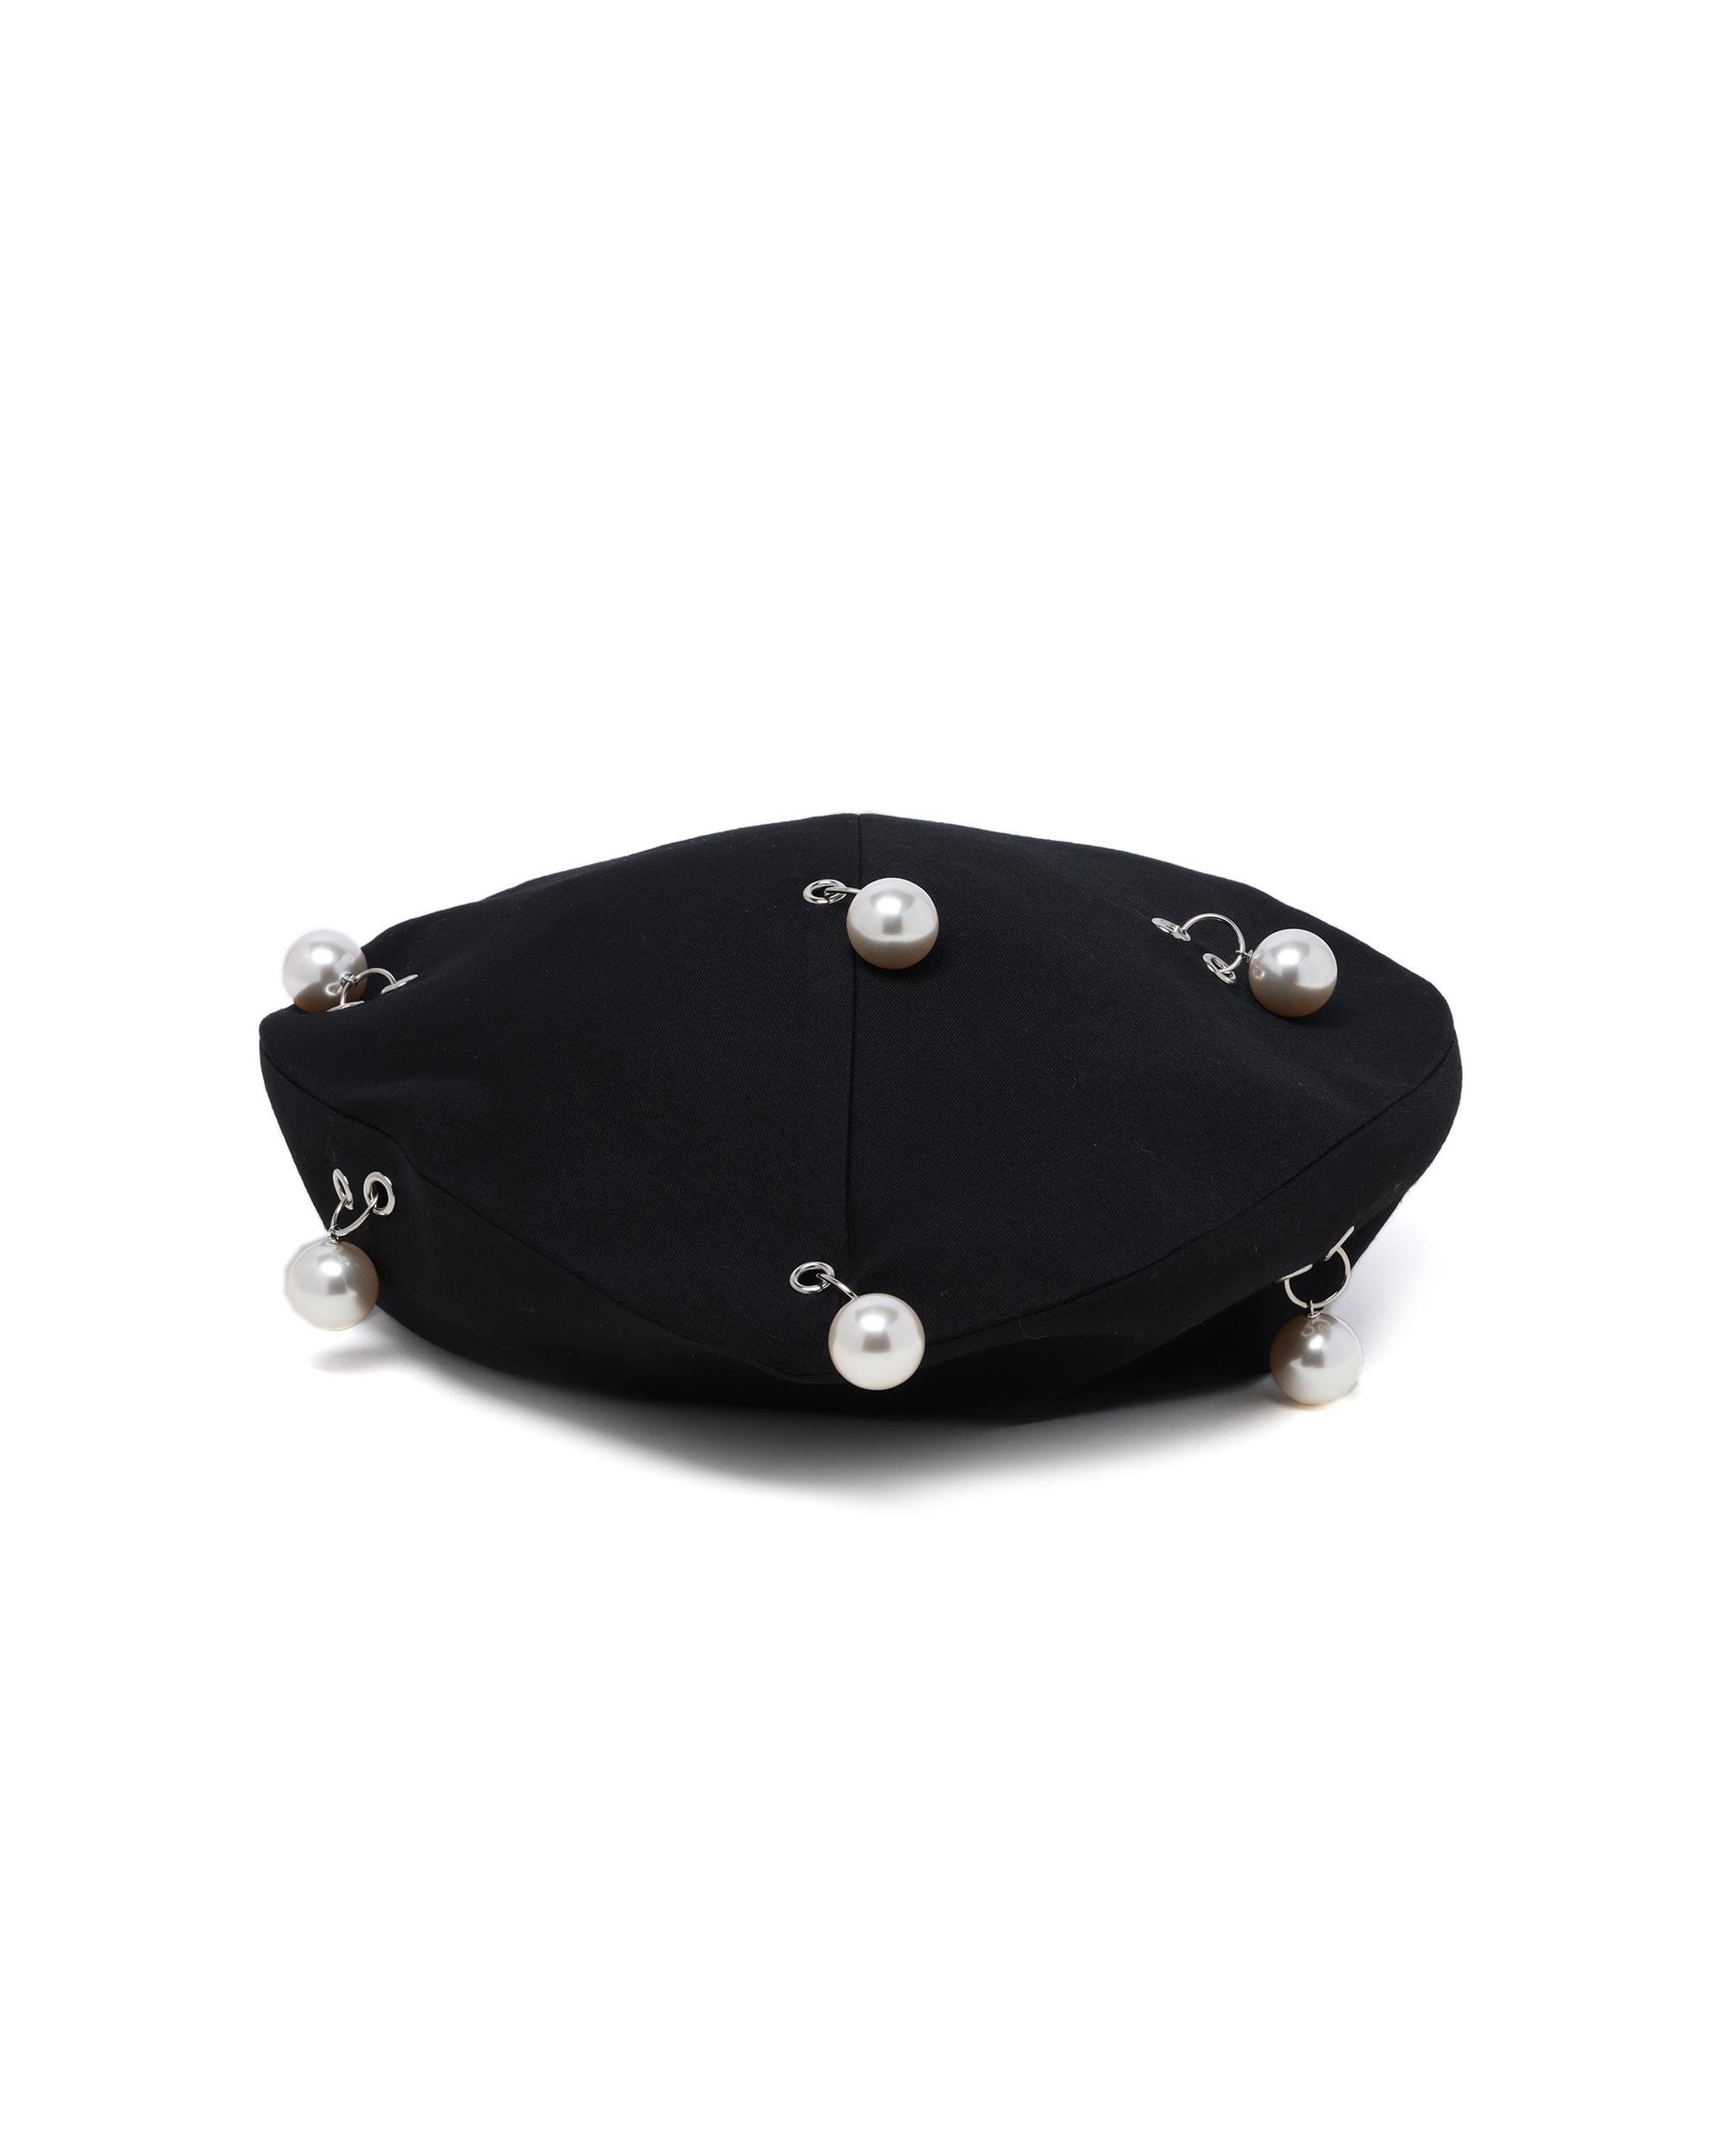 Pearl embellished beret by KIMHEKIM